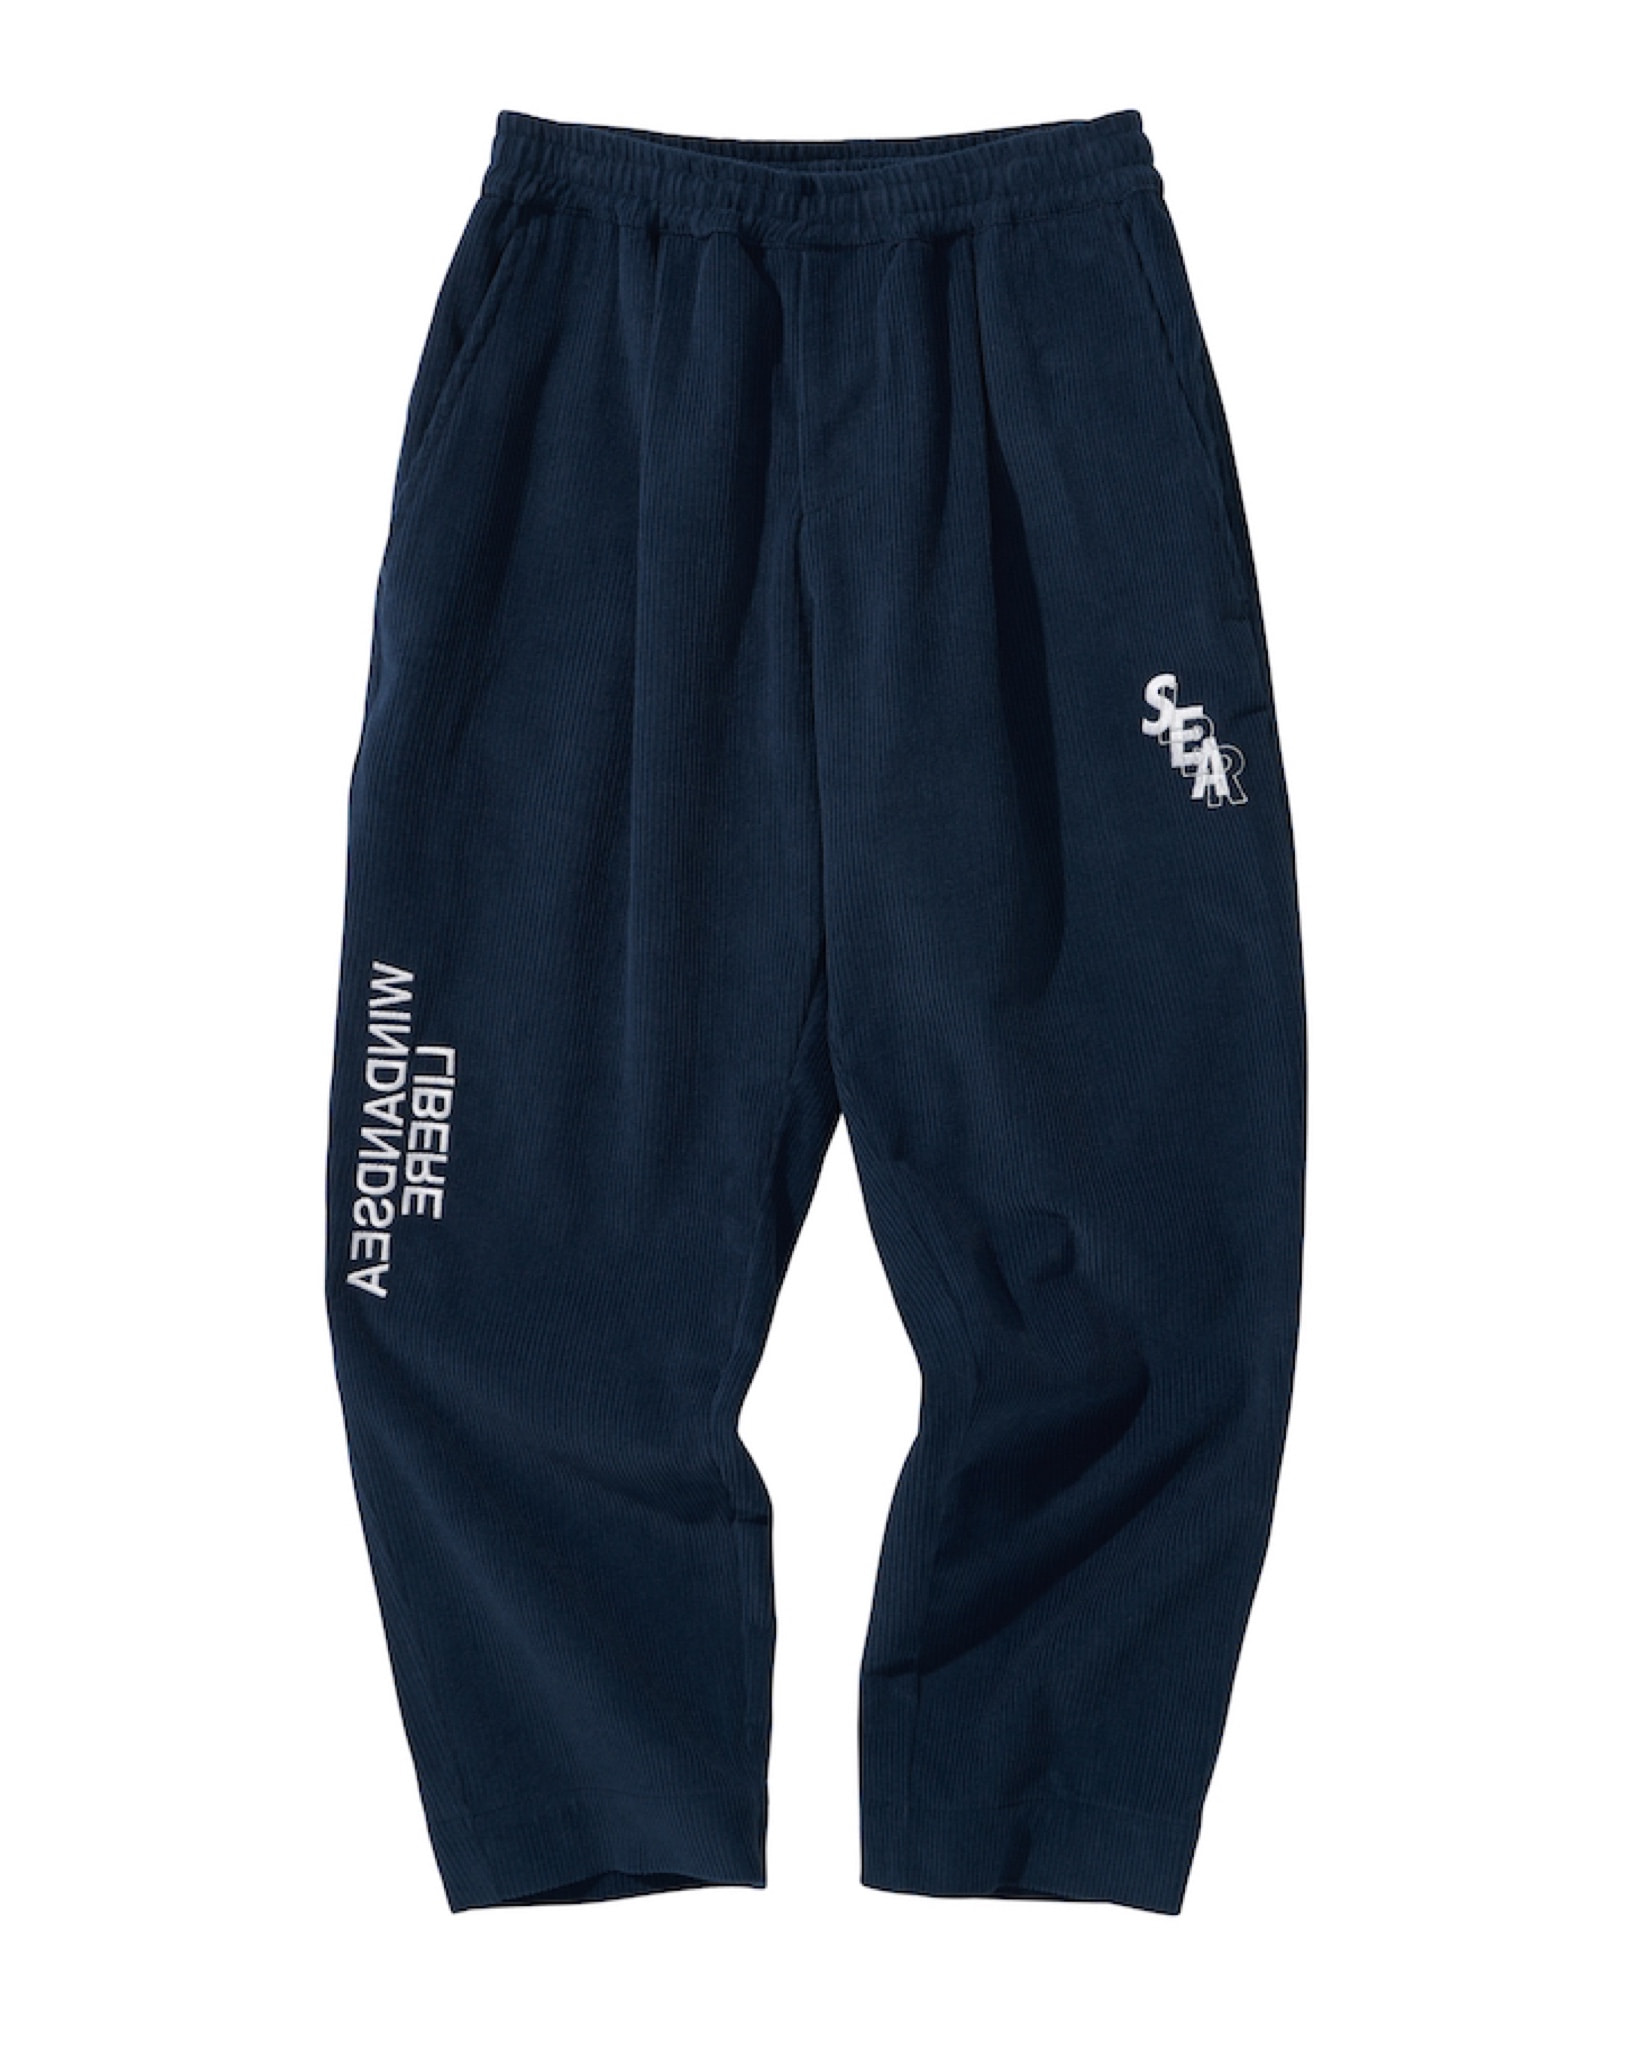 WDS X LIBERE WIDE EASY PANTS / NAVY,BTS,JAPAN,FASHIONBRAND,LIBERE